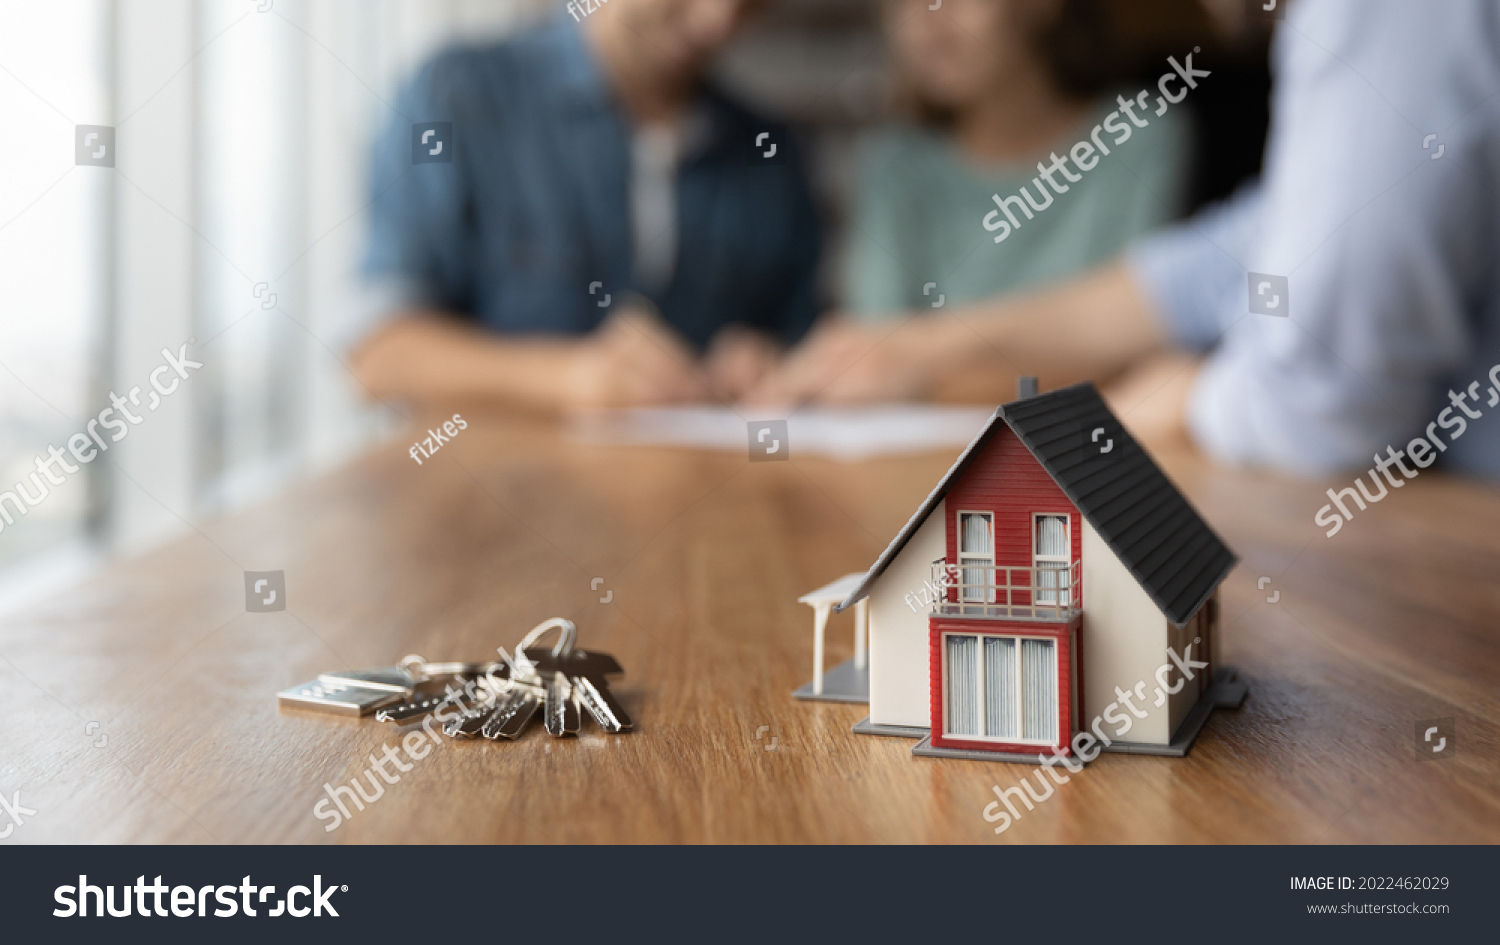 Close up of key and tiny toy house on table. Married couple buying house, consulting, lawyer, legal advisor, real estate agent, bank manager, signing mortgage agreement in background #2022462029